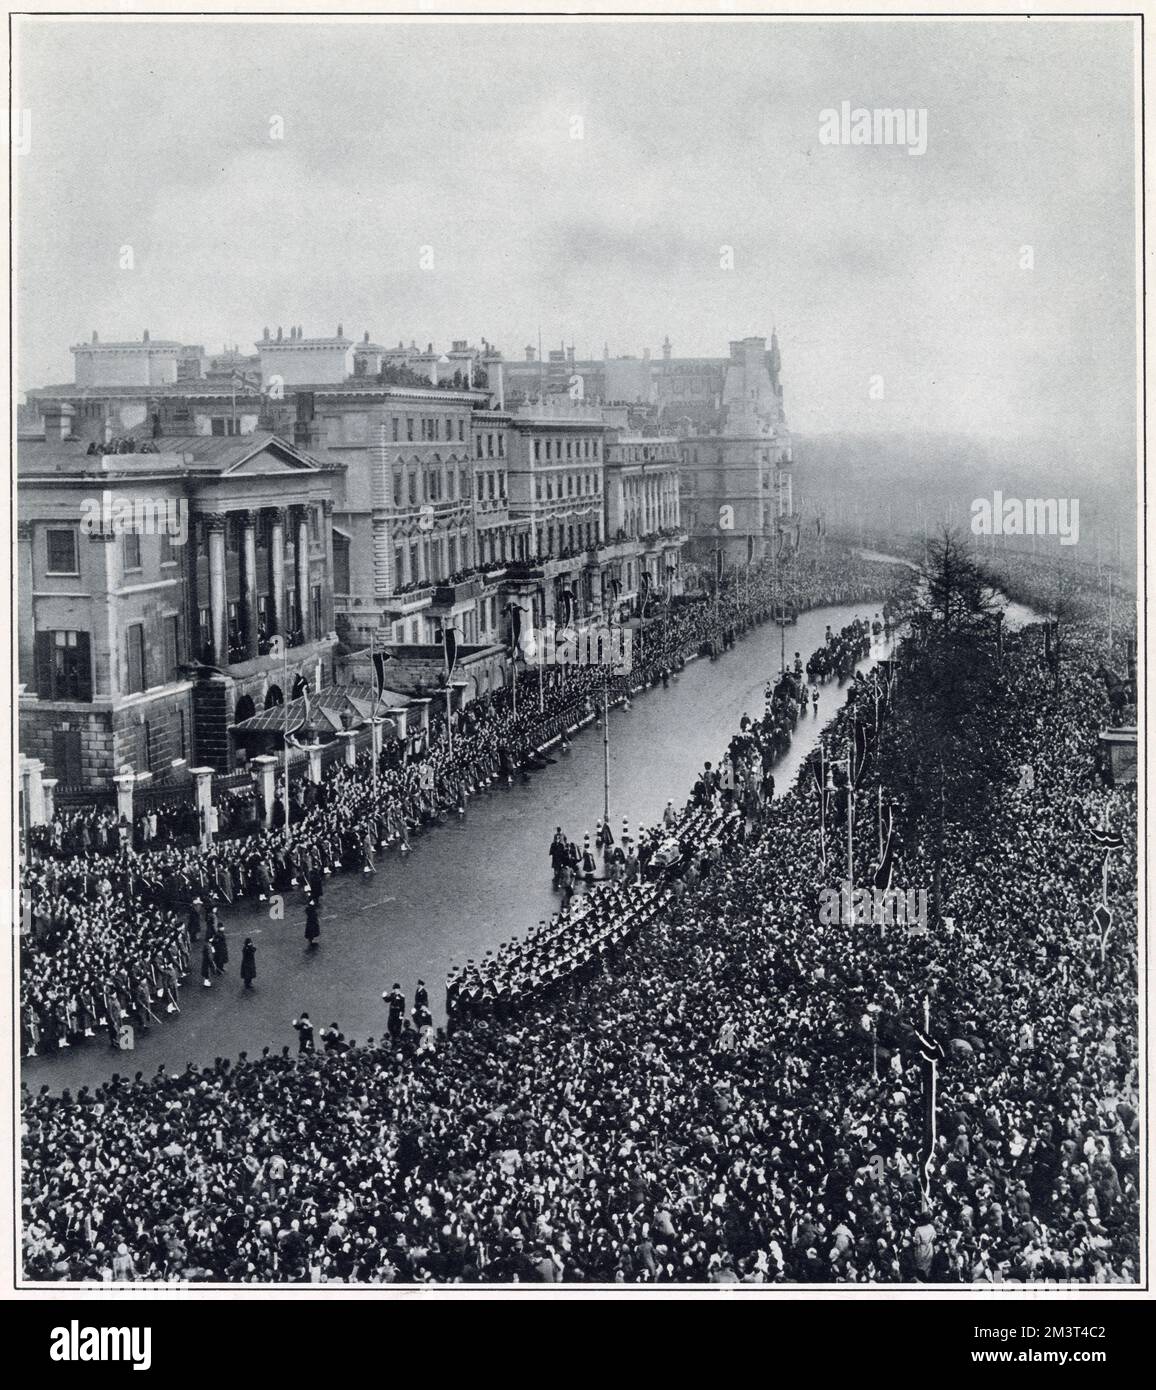 Where Princess Elizabeth and Princess Margaret viewed the funeral procession of King George V as it travelled up Piccadilly towards Hyde Park Corner. View from the balcony of 145, Piccadilly, childhood home of Queen Elizabeth II. Princess Margaret could be seen watching on the balcony of the house as the procession passed by while Princess Elizabeth watched from a window. They then travelled by car to Windsor with Queen Mary and their mother, the Duchess of York. Stock Photo